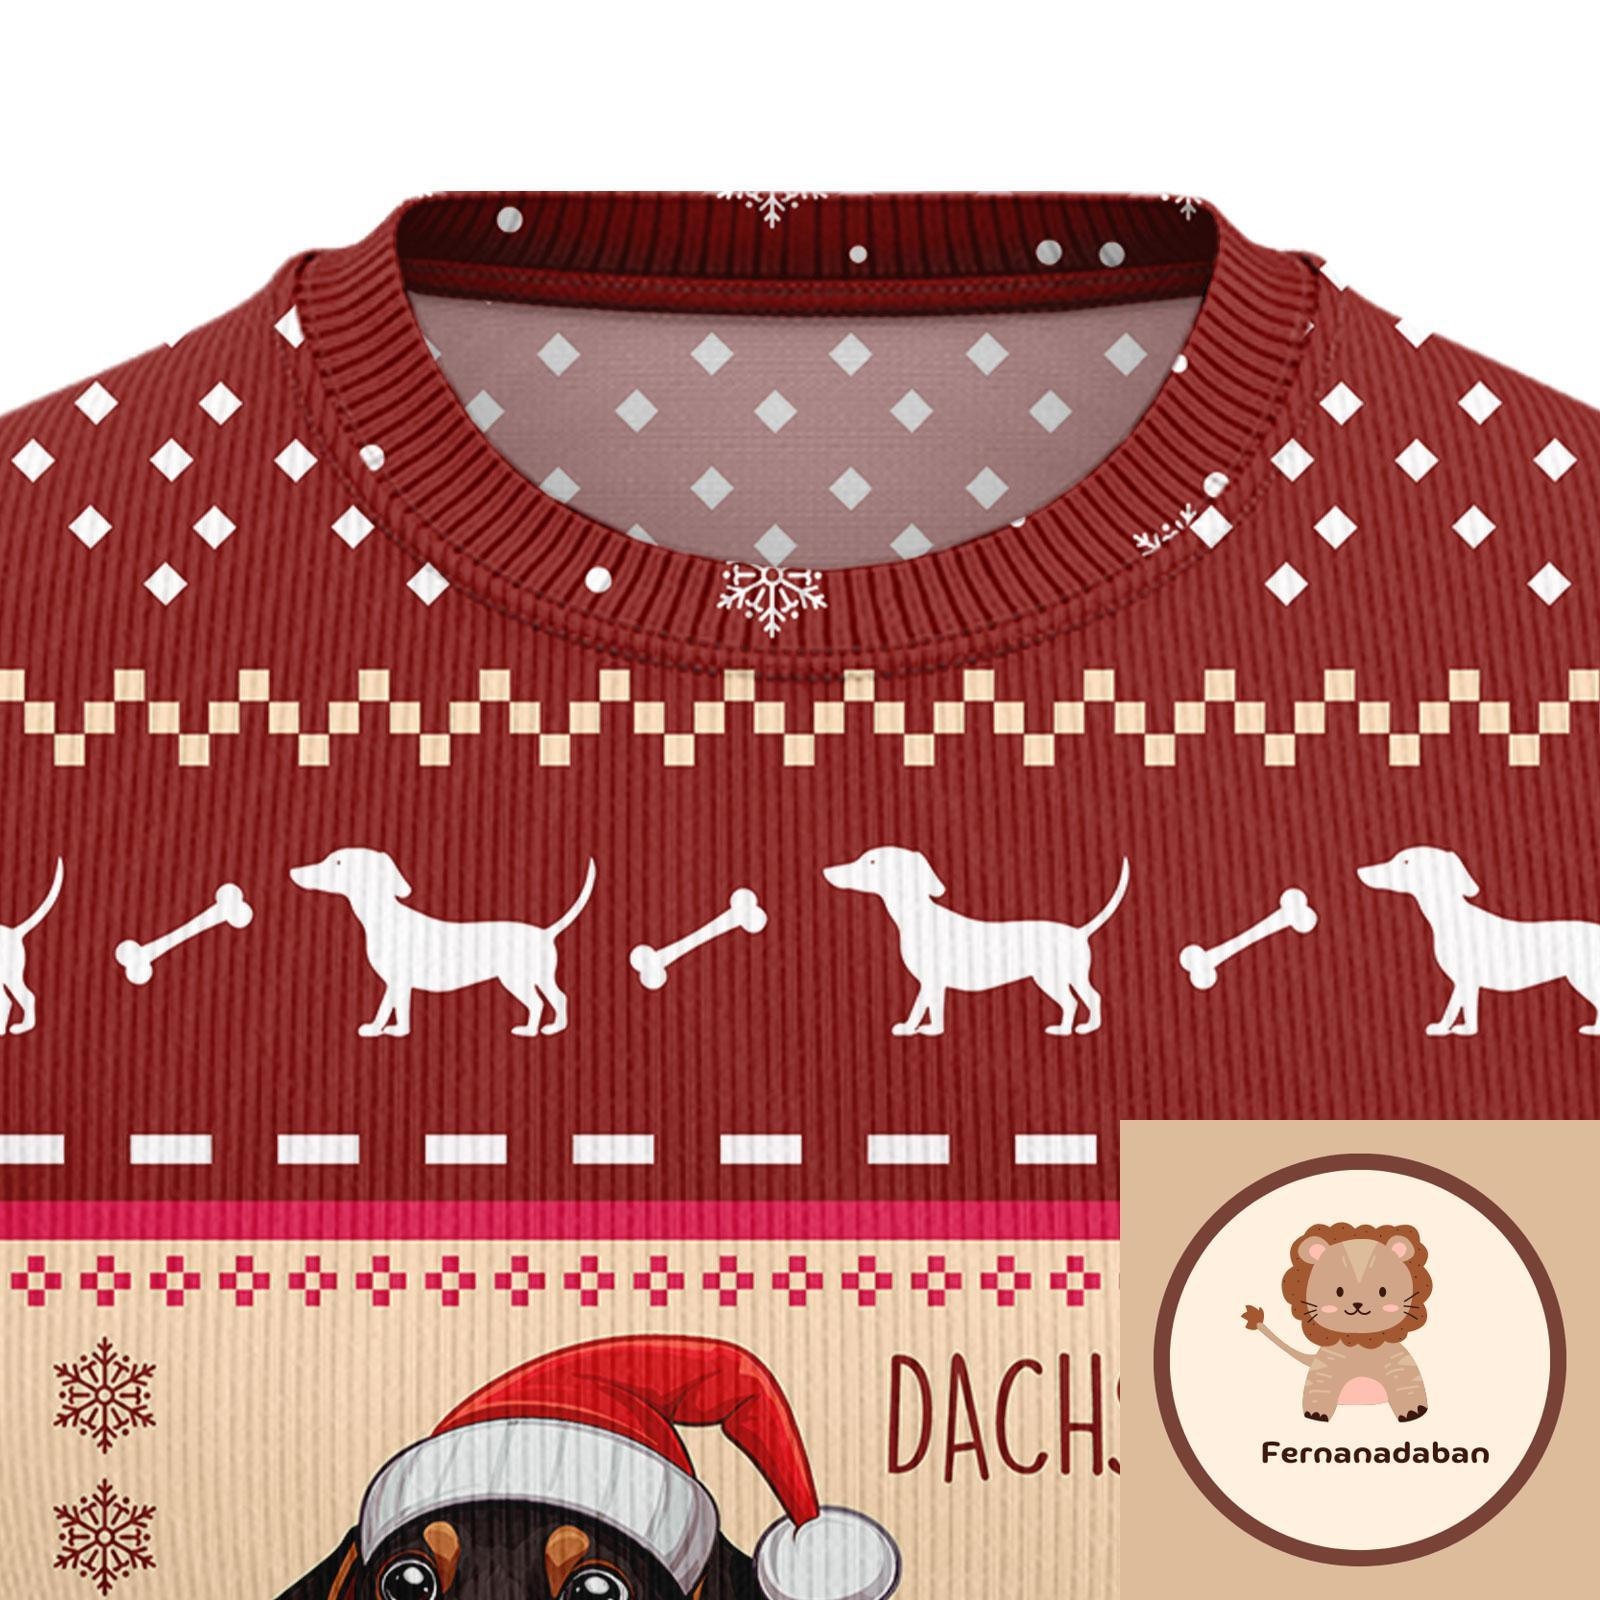 Discover Christmas Gift, Dachshund Ugly Sweater, Dachshund Sweater, Dachshund Christmas Sweater,Dachshund Ugly Christmas Sweater,Dachshund Shirt